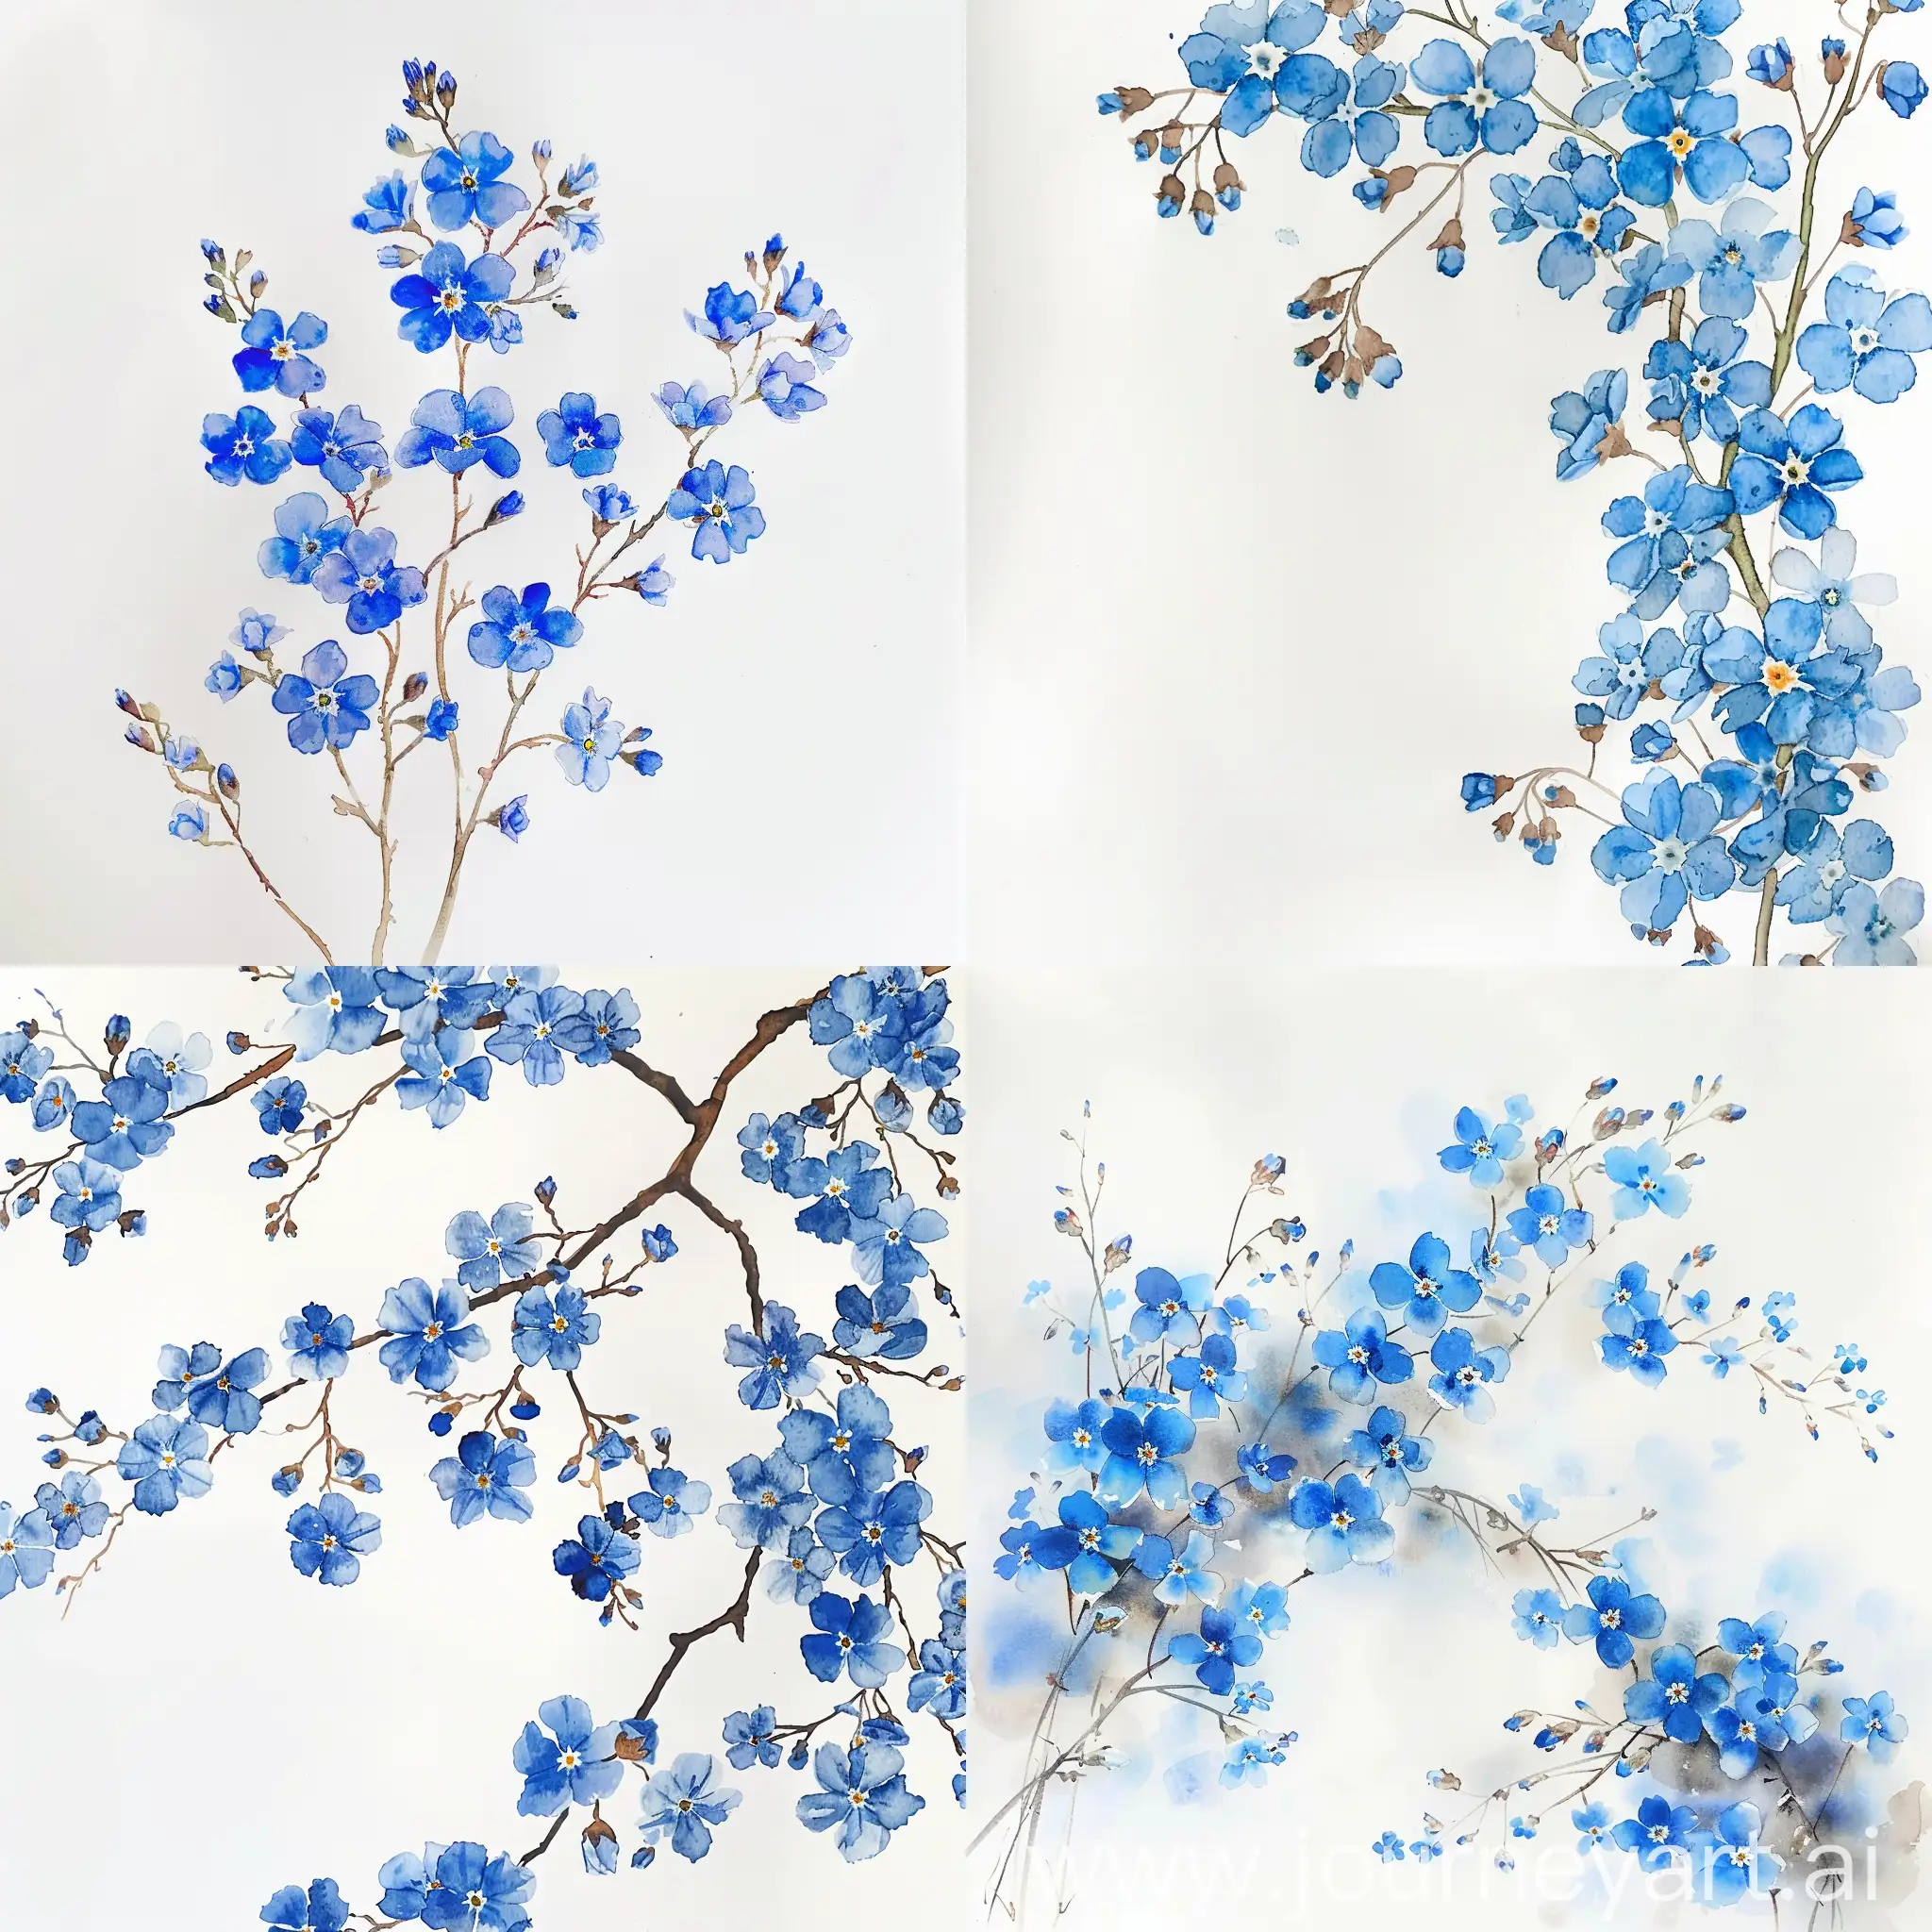 Serene-Watercolor-Painting-of-Forget-Me-Nots-on-White-Background